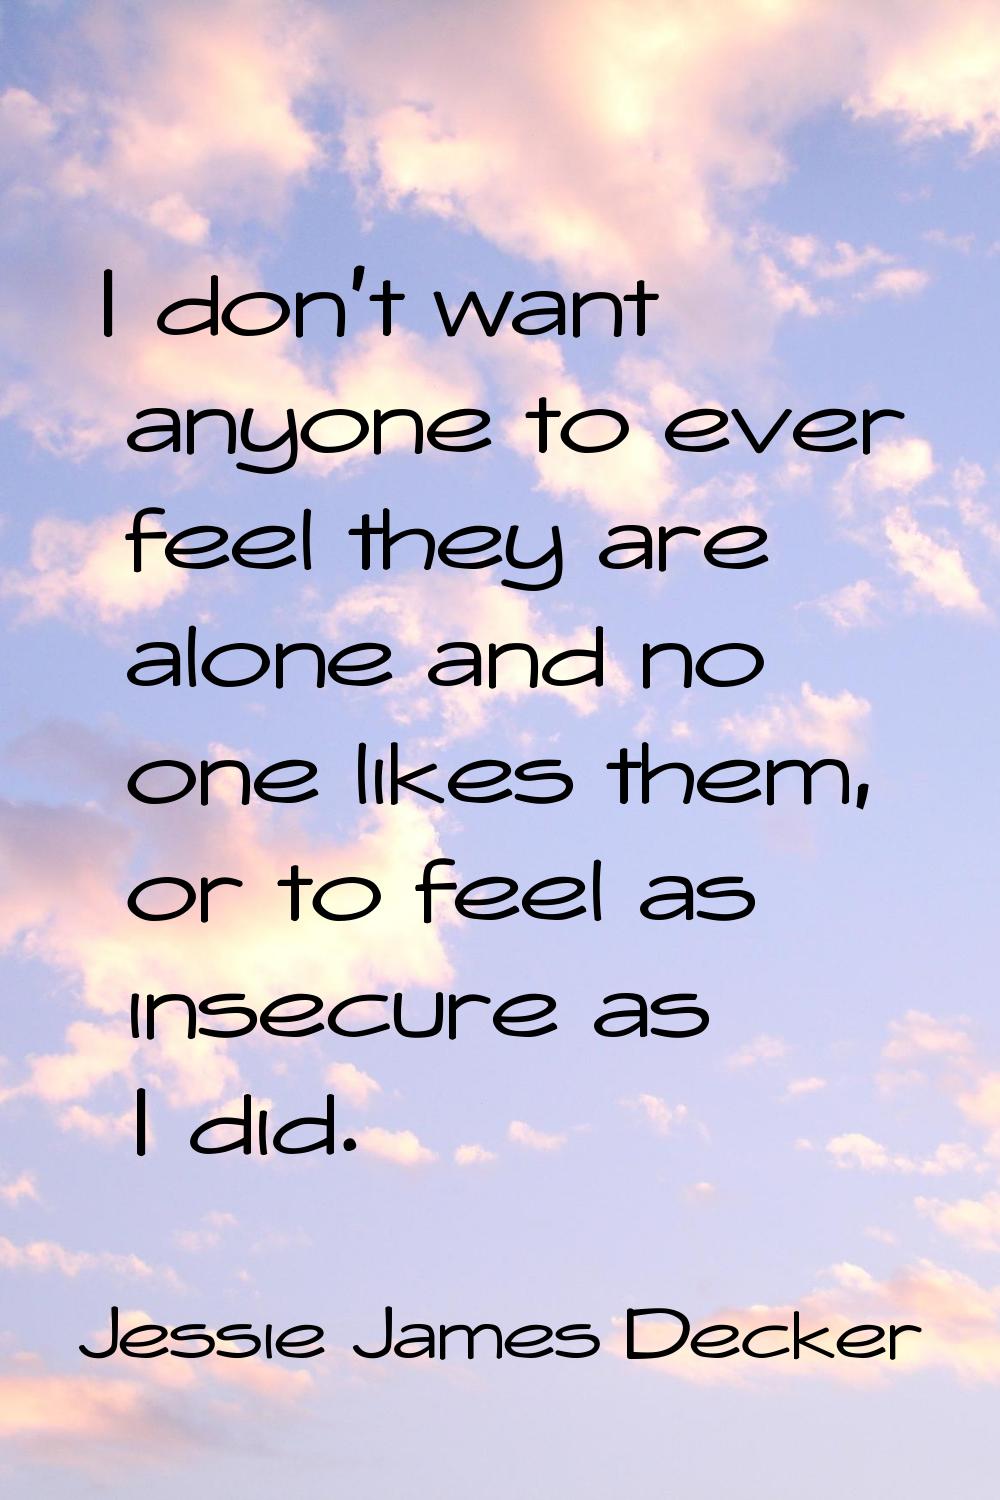 I don't want anyone to ever feel they are alone and no one likes them, or to feel as insecure as I 